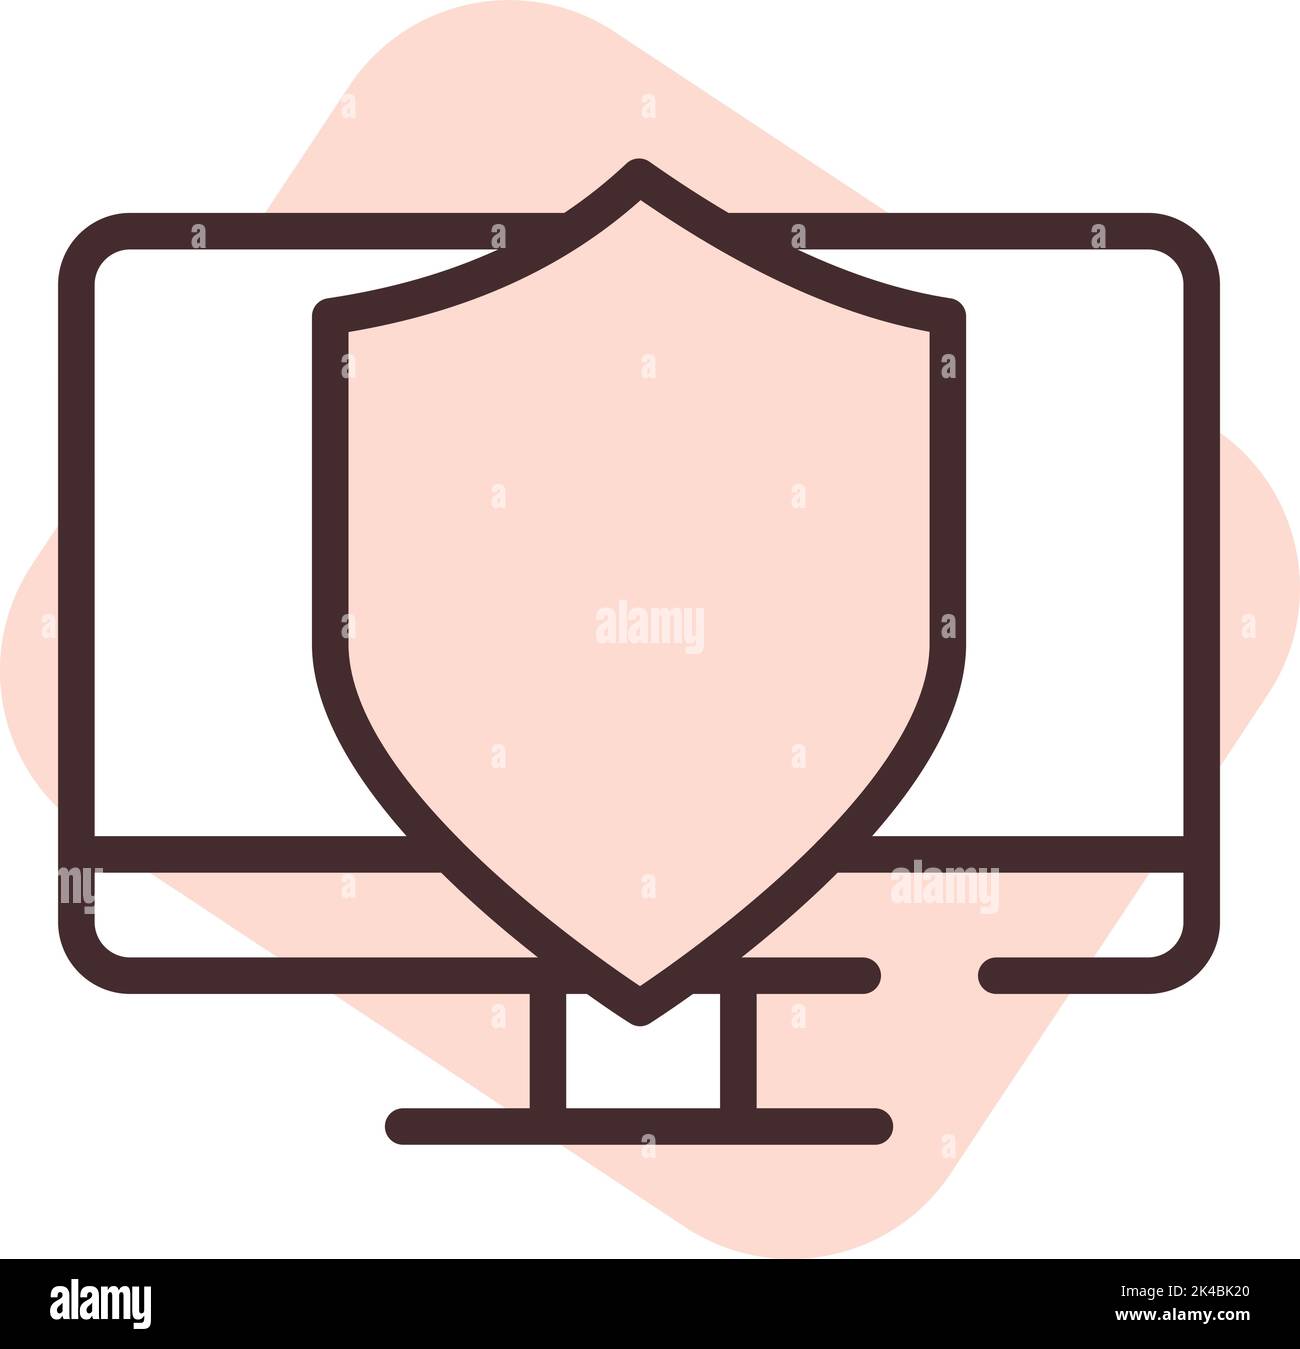 Cyber security defender, illustration, vector on white background. Stock Vector